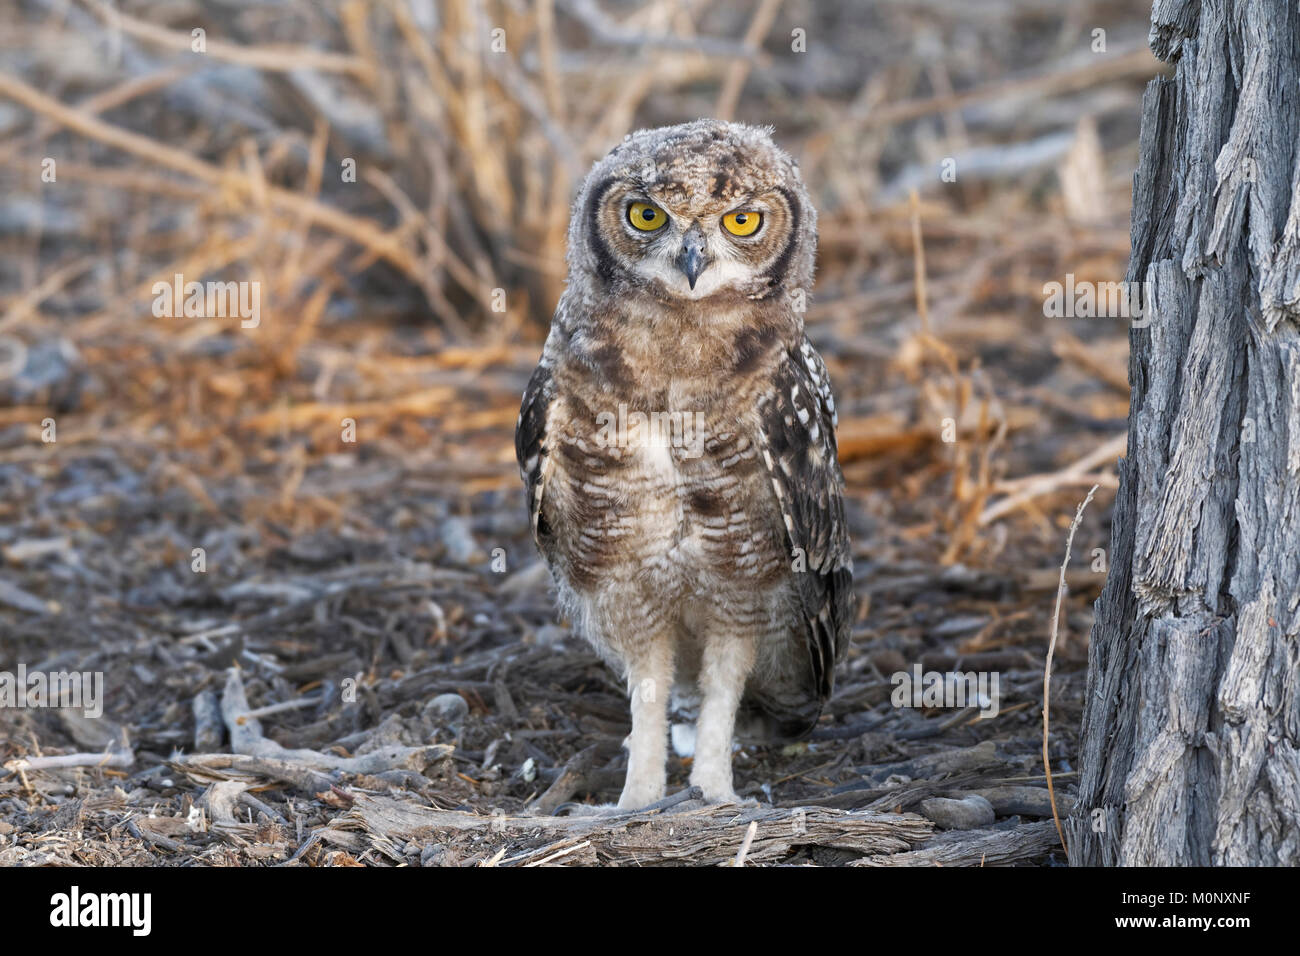 Spotted eagle-owl (Bubo africanus),young bird on the ground,Kgalagadi Transfrontier Park,Northern Cape,South Africa Stock Photo